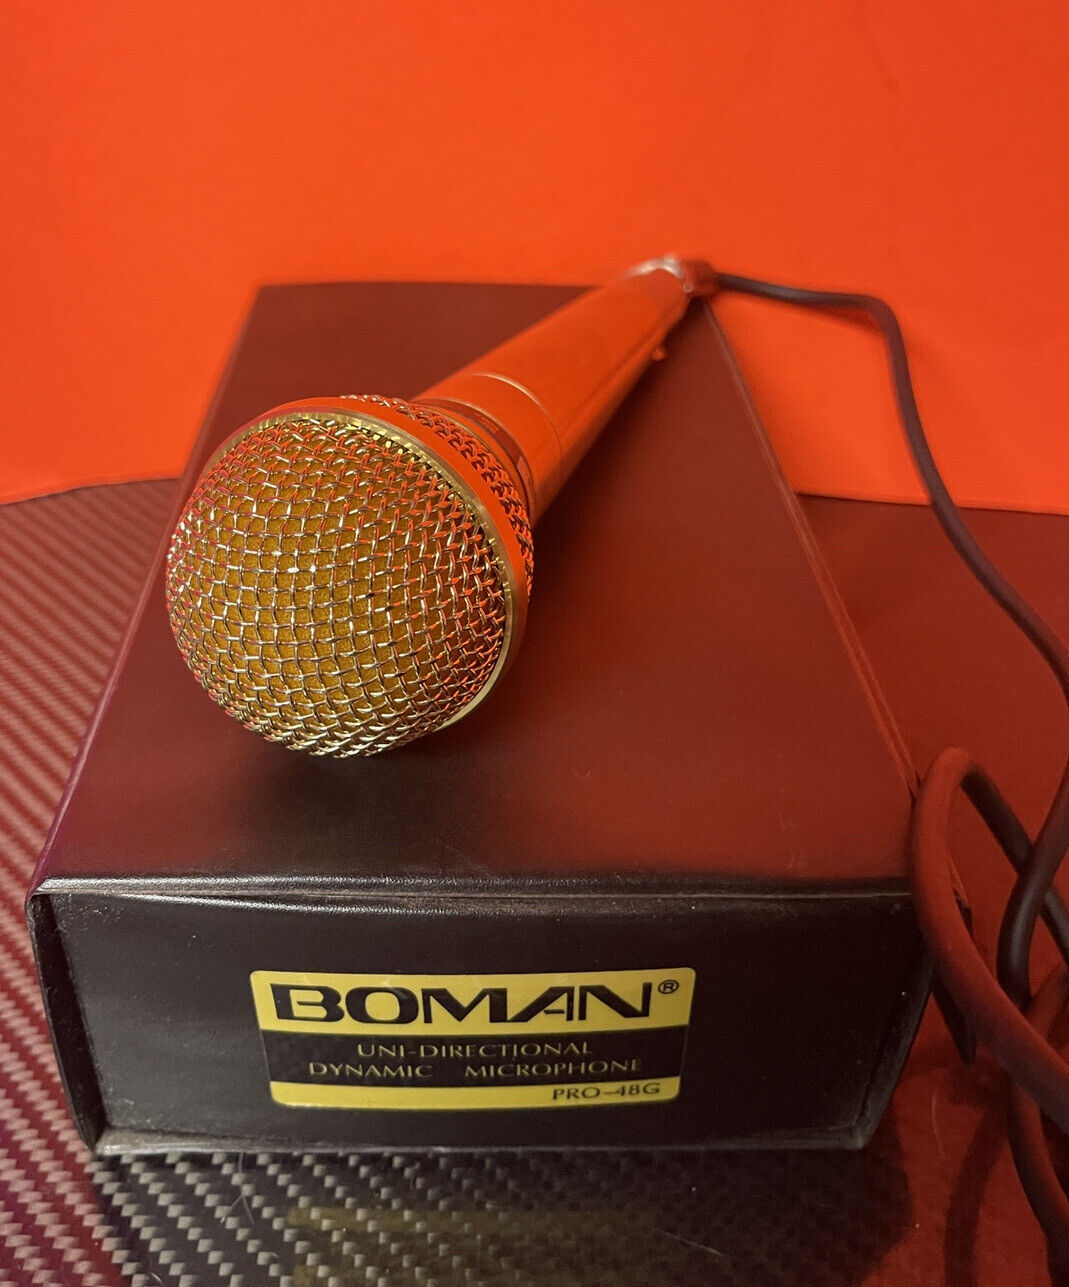 Boman Pro-48g Gold Tone Uni-directional Dynamic Microphone W/cord And Case Gc